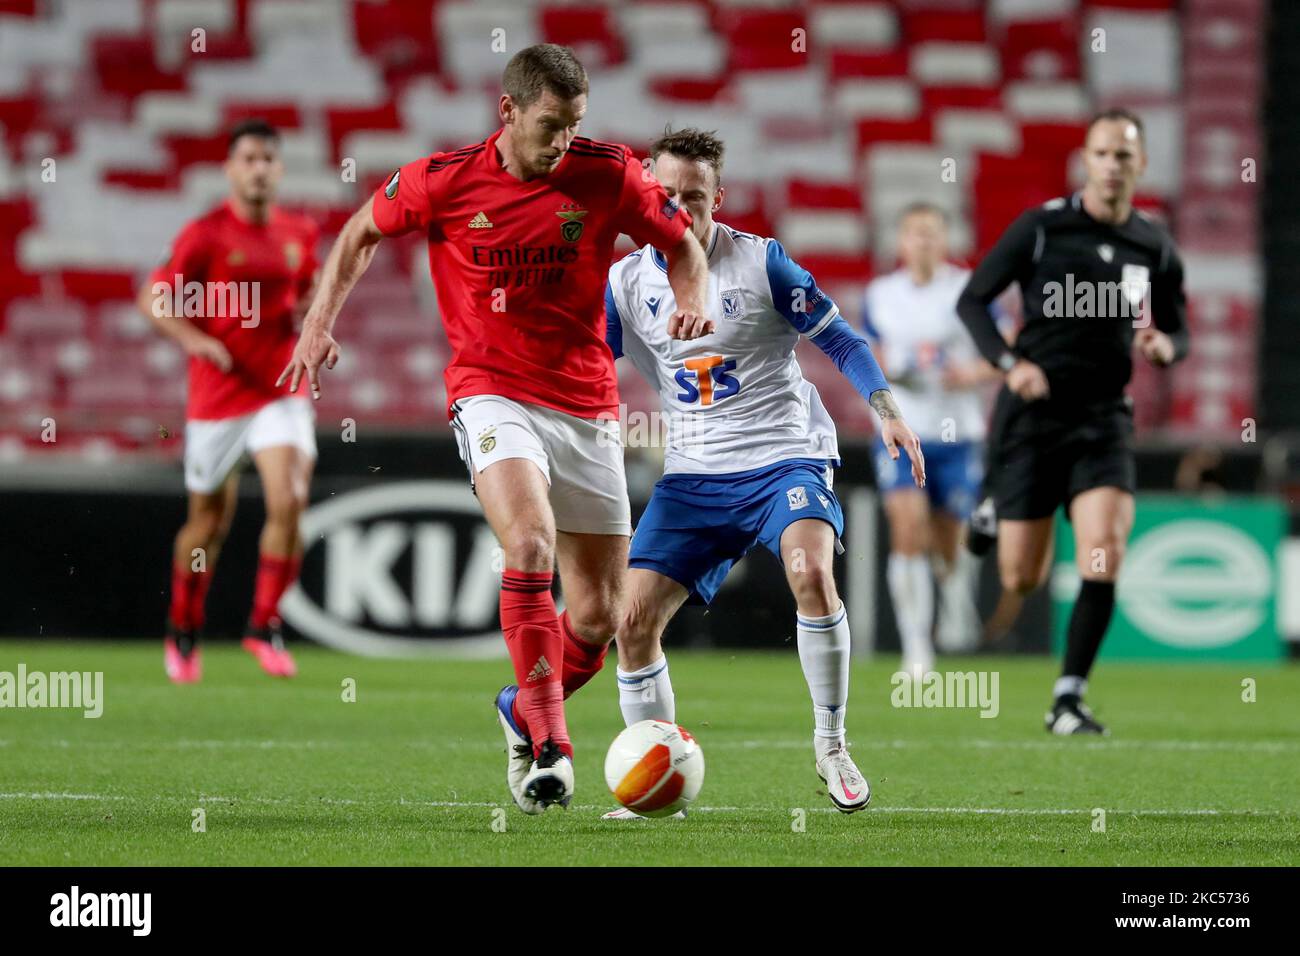 Jan Vertonghen of SL Benfica (L) vies with Jan Sykora of Lech Poznan during the UEFA Europa League Group D football match between SL Benfica and Lech Poznan at the Luz stadium in Lisbon, Portugal on December 3, 2020. (Photo by Pedro FiÃºza/NurPhoto) Stock Photo